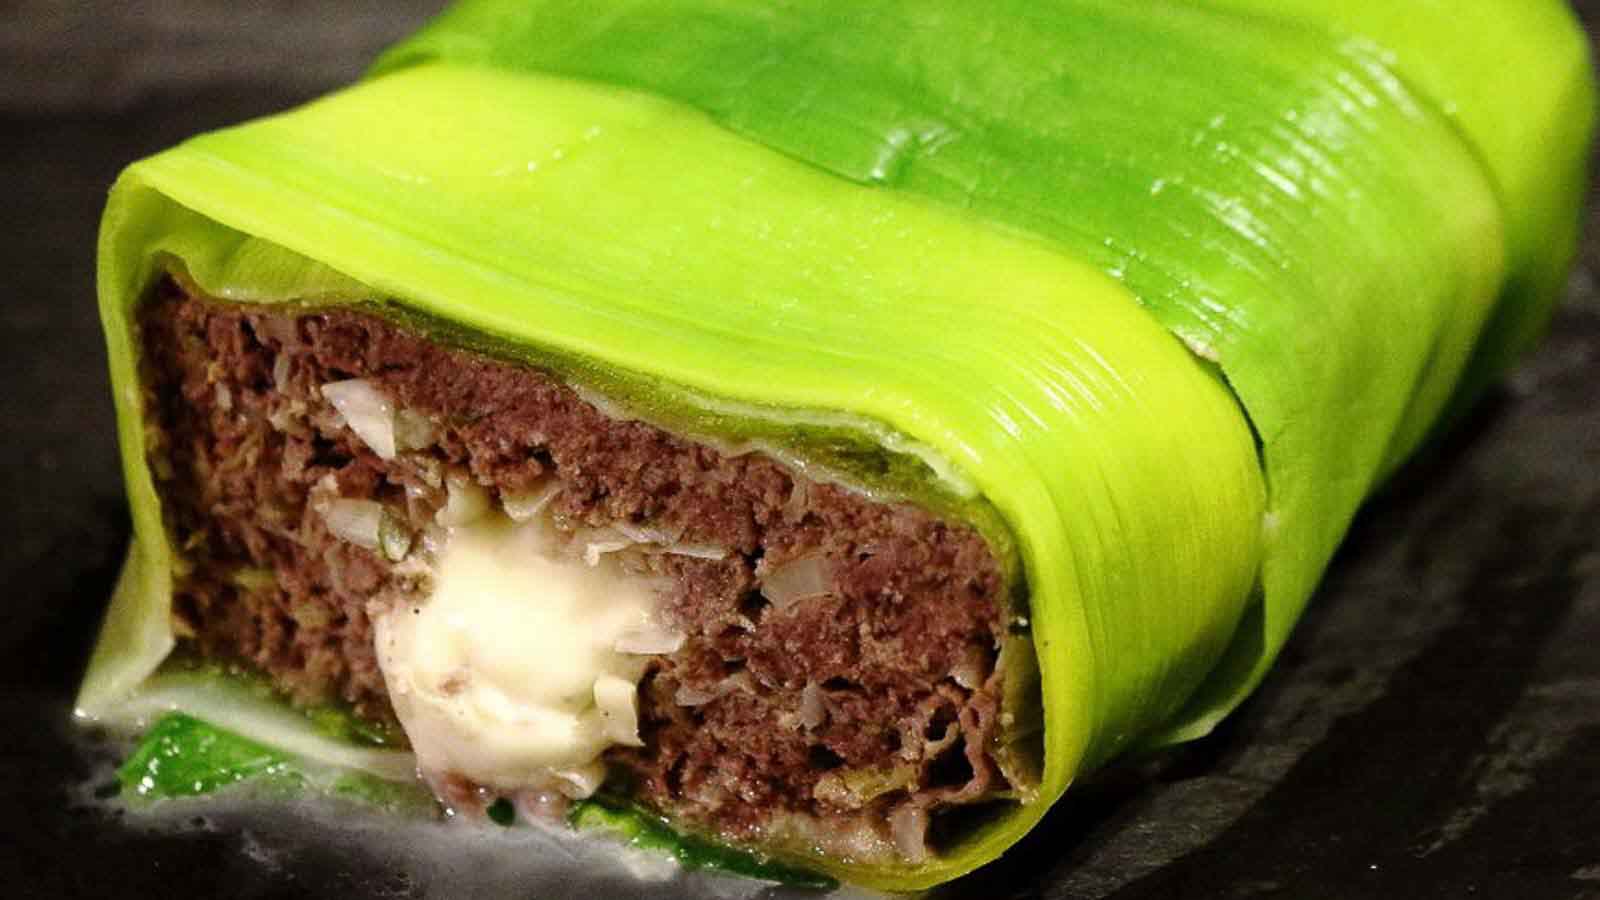 Cheesy Leek Meatloaf. Photo credit: Low Carb – No Carb.